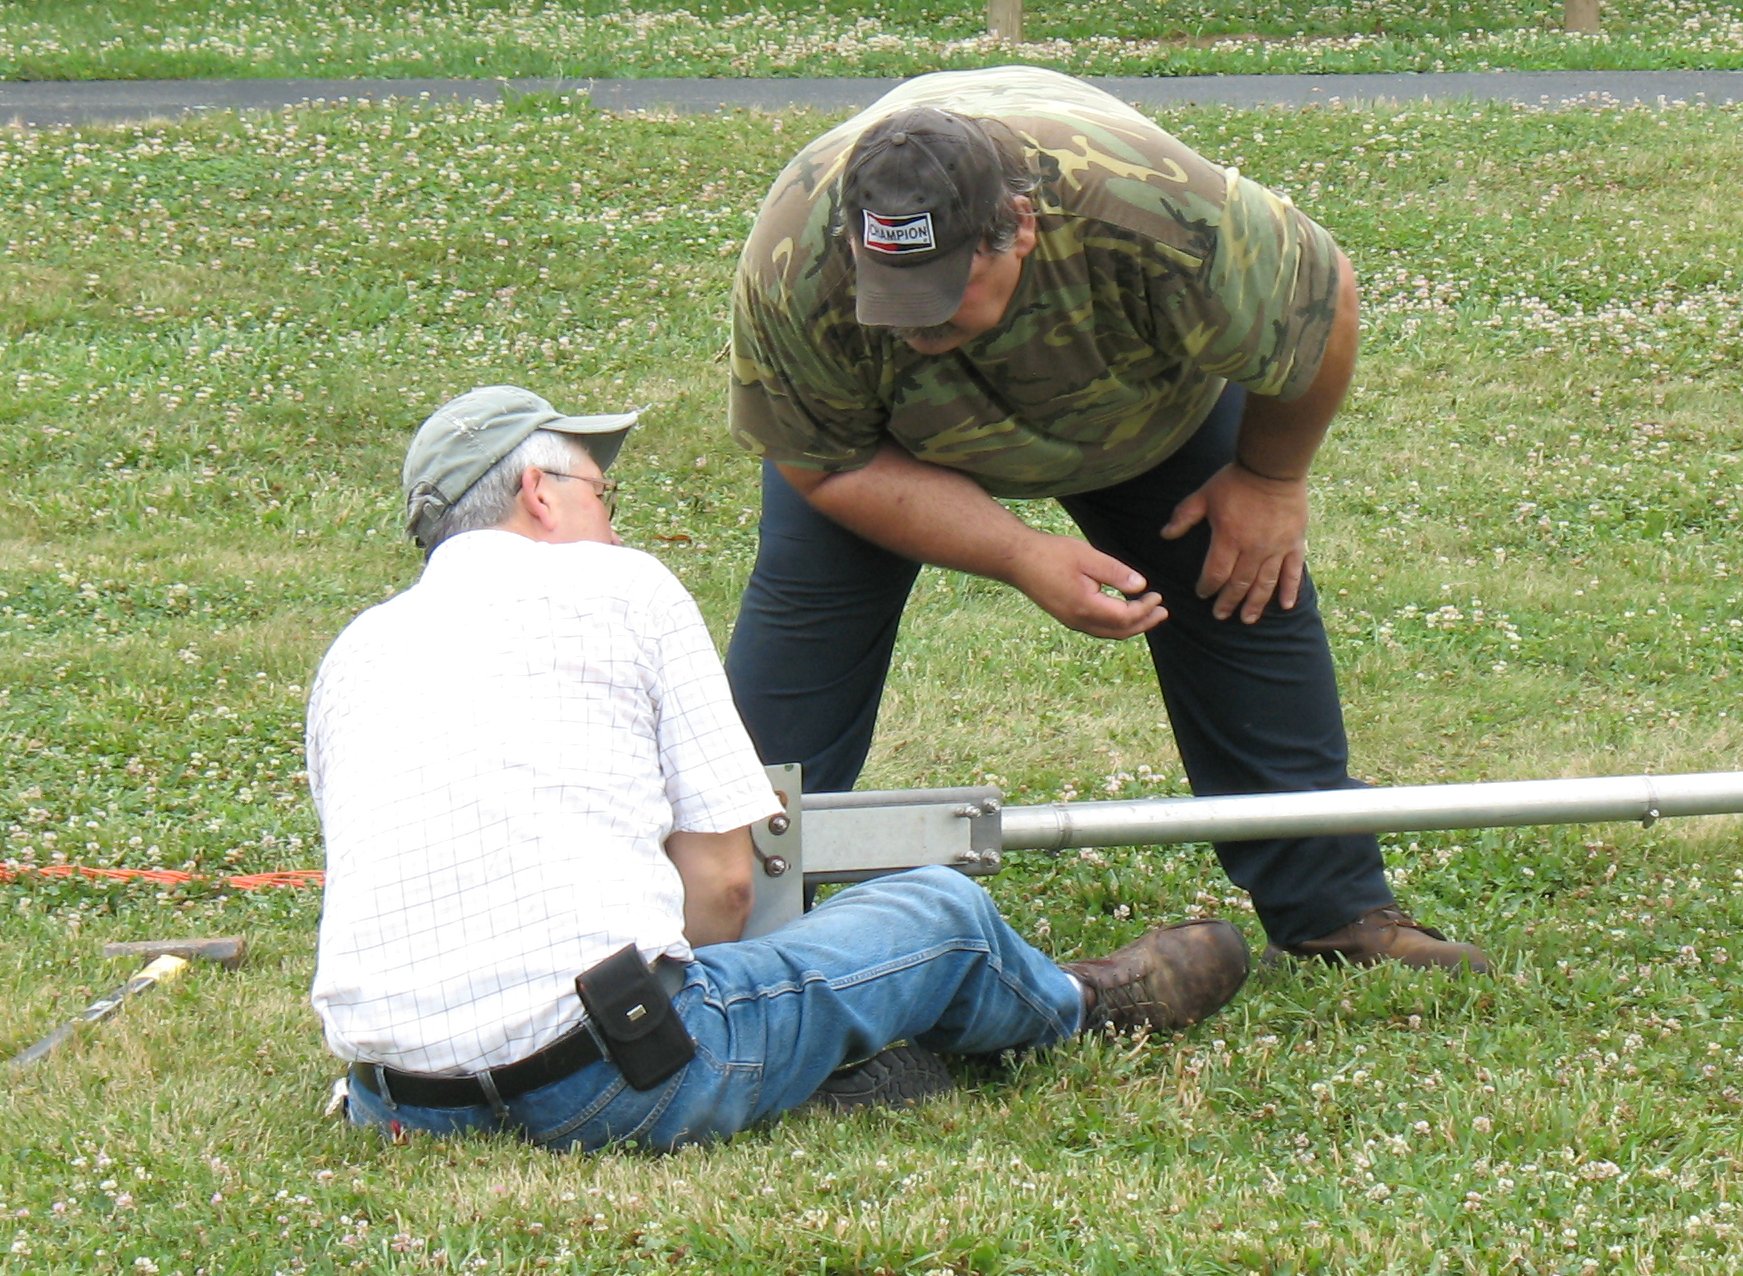 Example Antenna at Field Day